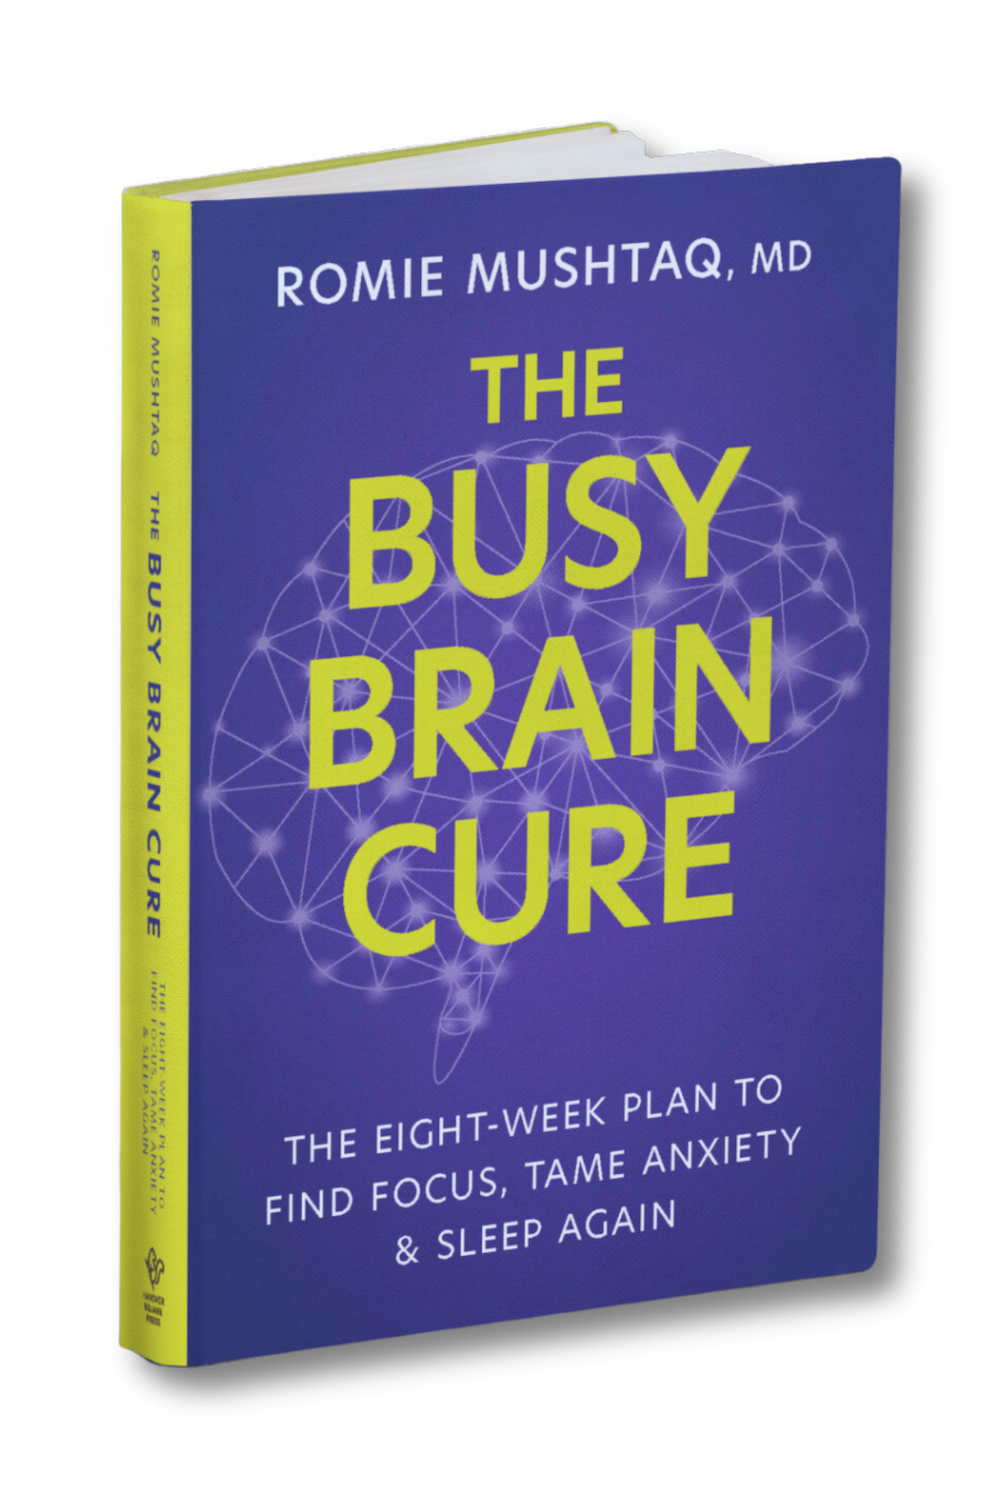 The Busy Brain Cure book cover